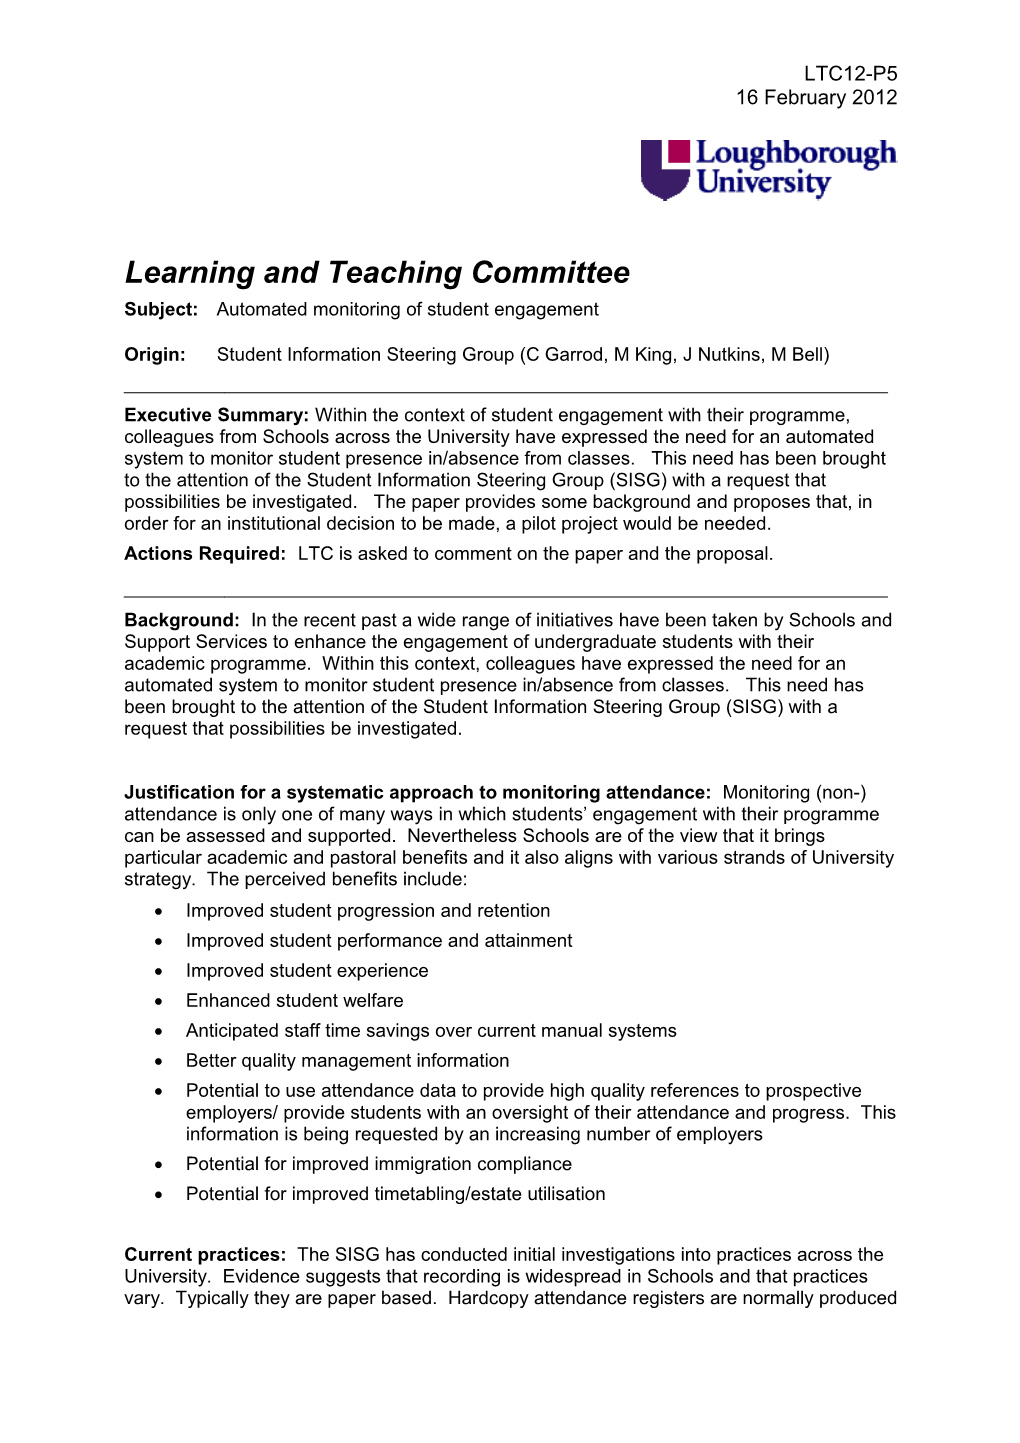 Learning and Teaching Committee